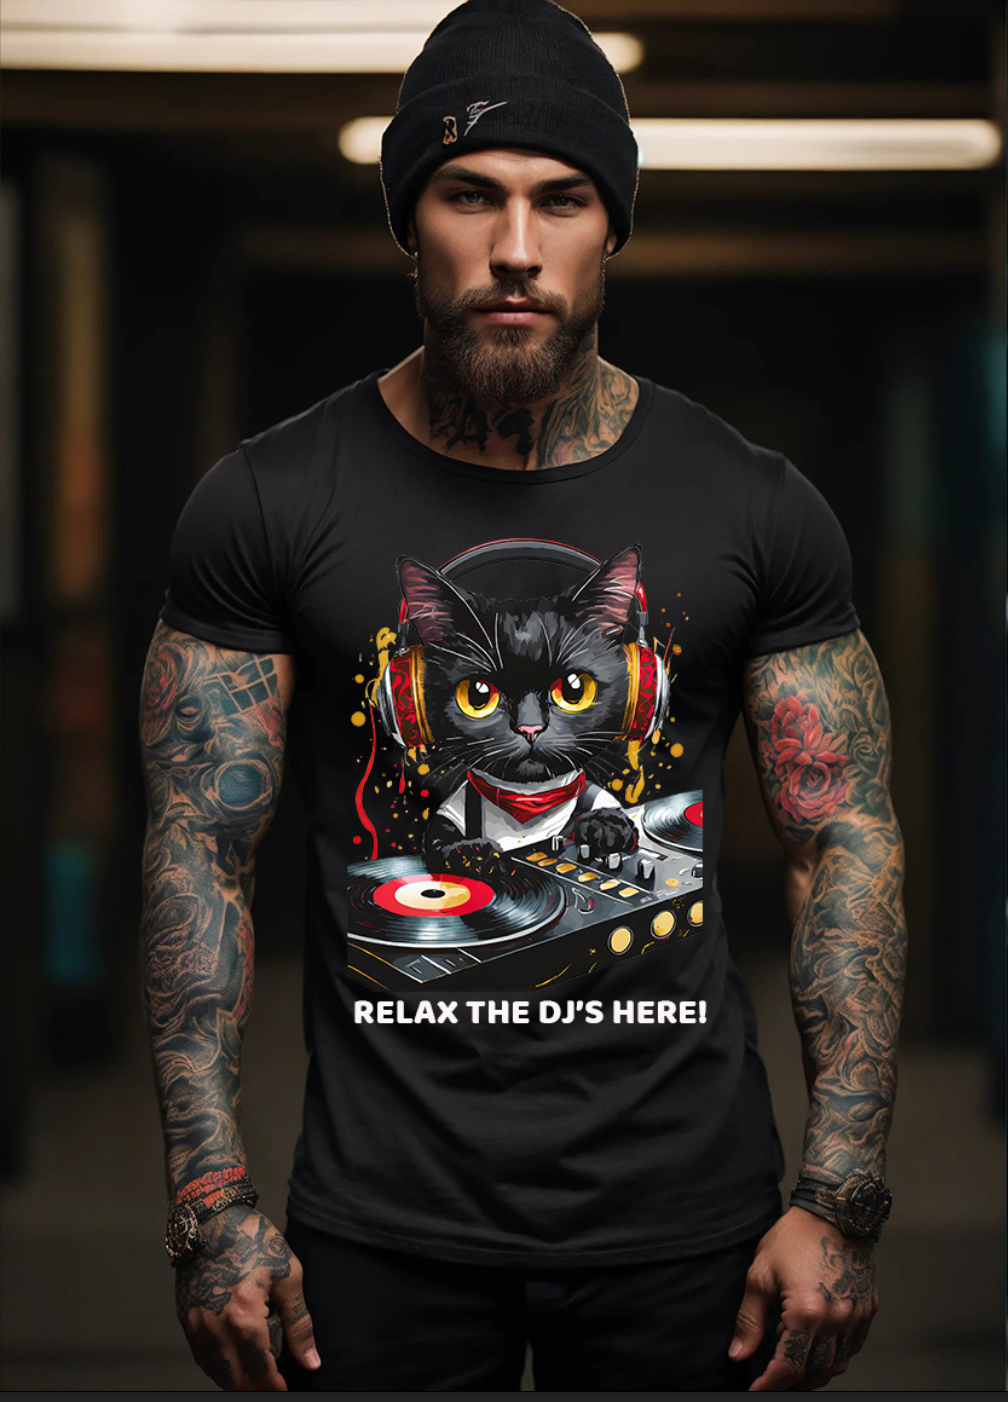 Cat Relax the Dj's Here Art design Exclusive T-Shirts | Grooveman Music